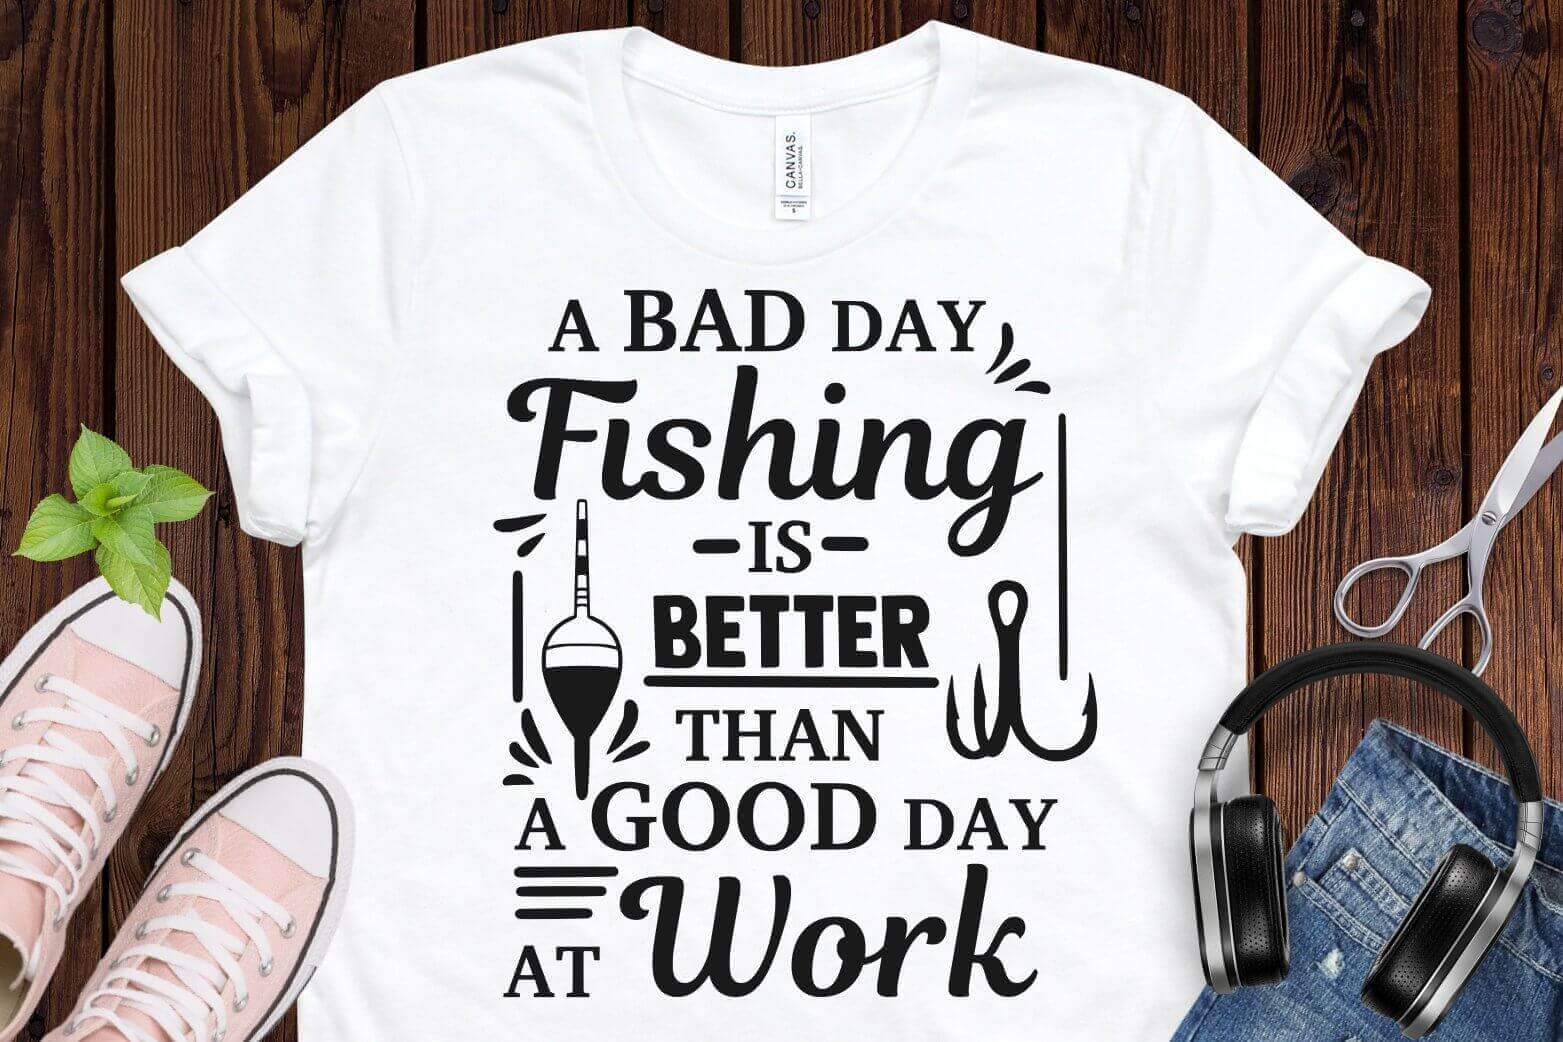 A Bad Day Fishing is Better Than a Good Day at Work.